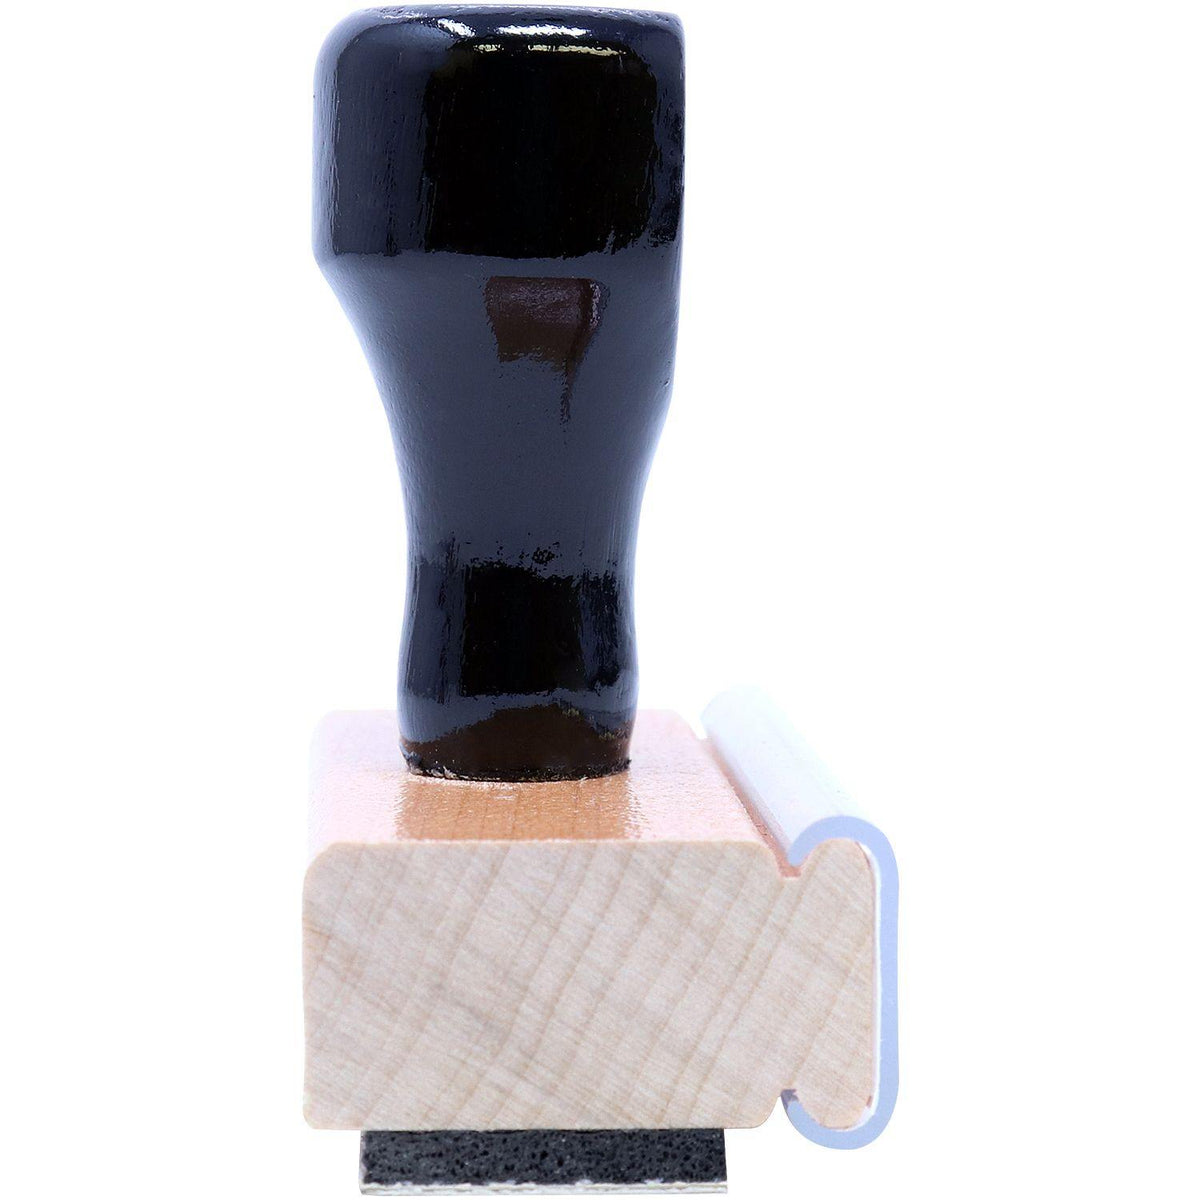 Side View of Large Expres Entrega Inmedia Rubber Stamp